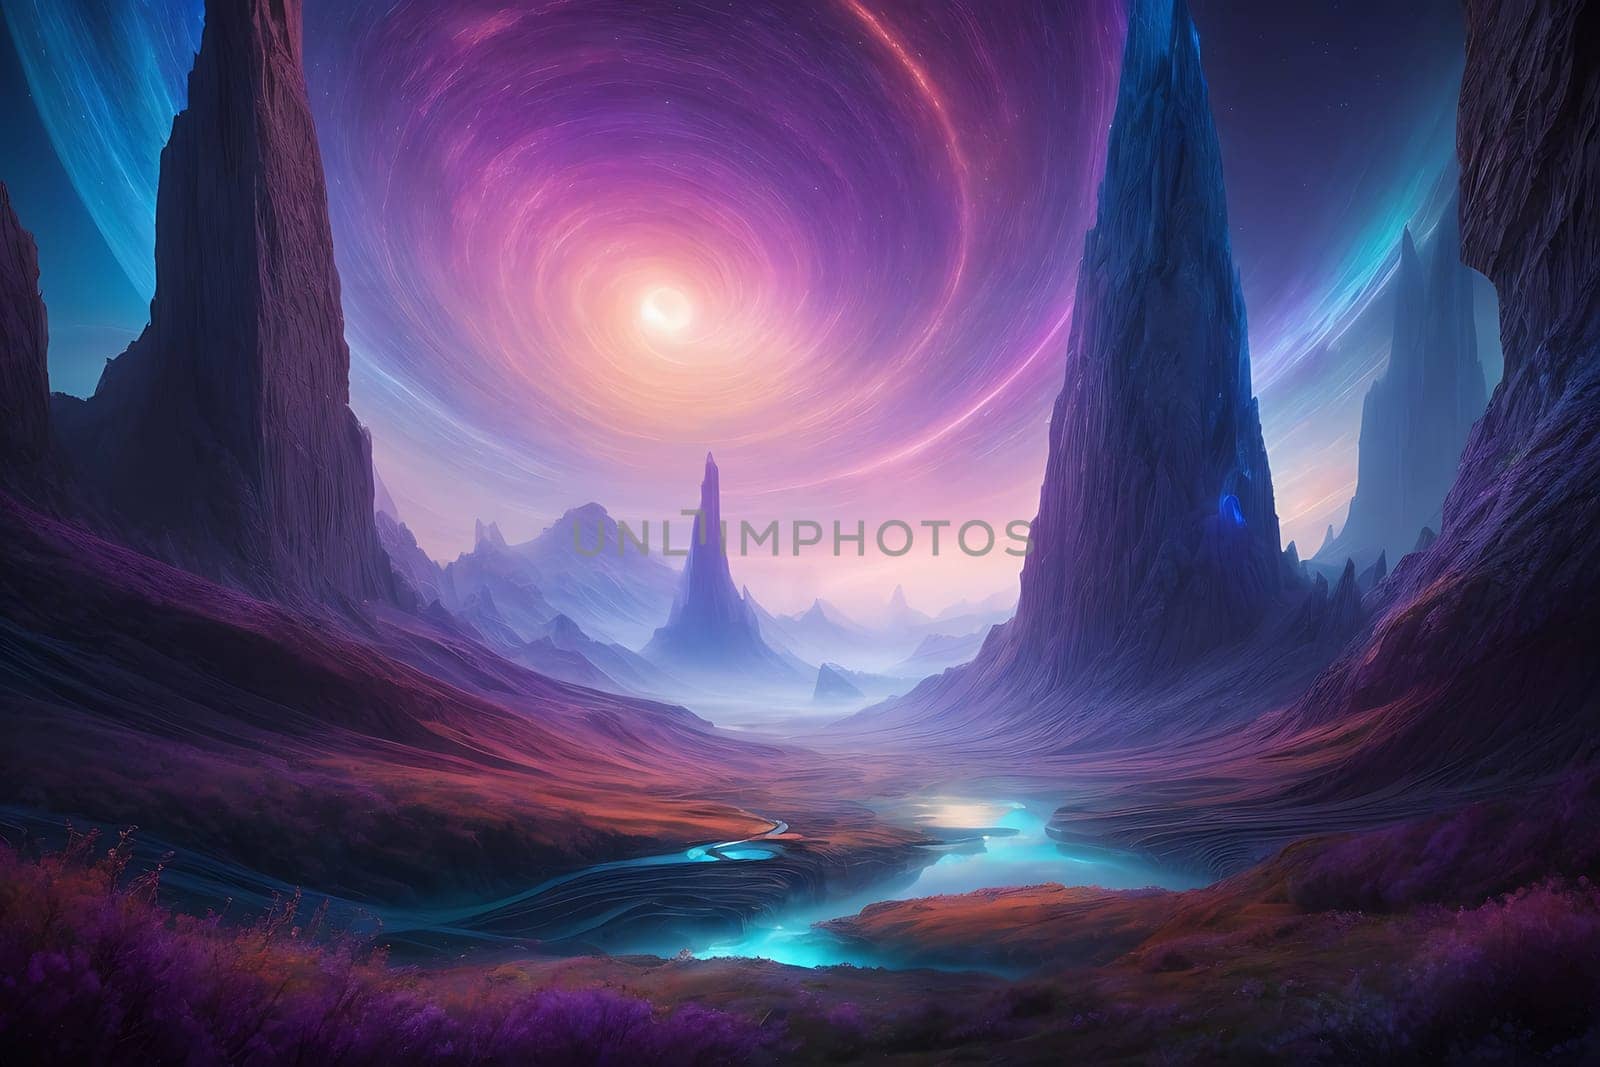 A peaceful and captivating painting that showcases a stunning purple and blue landscape.